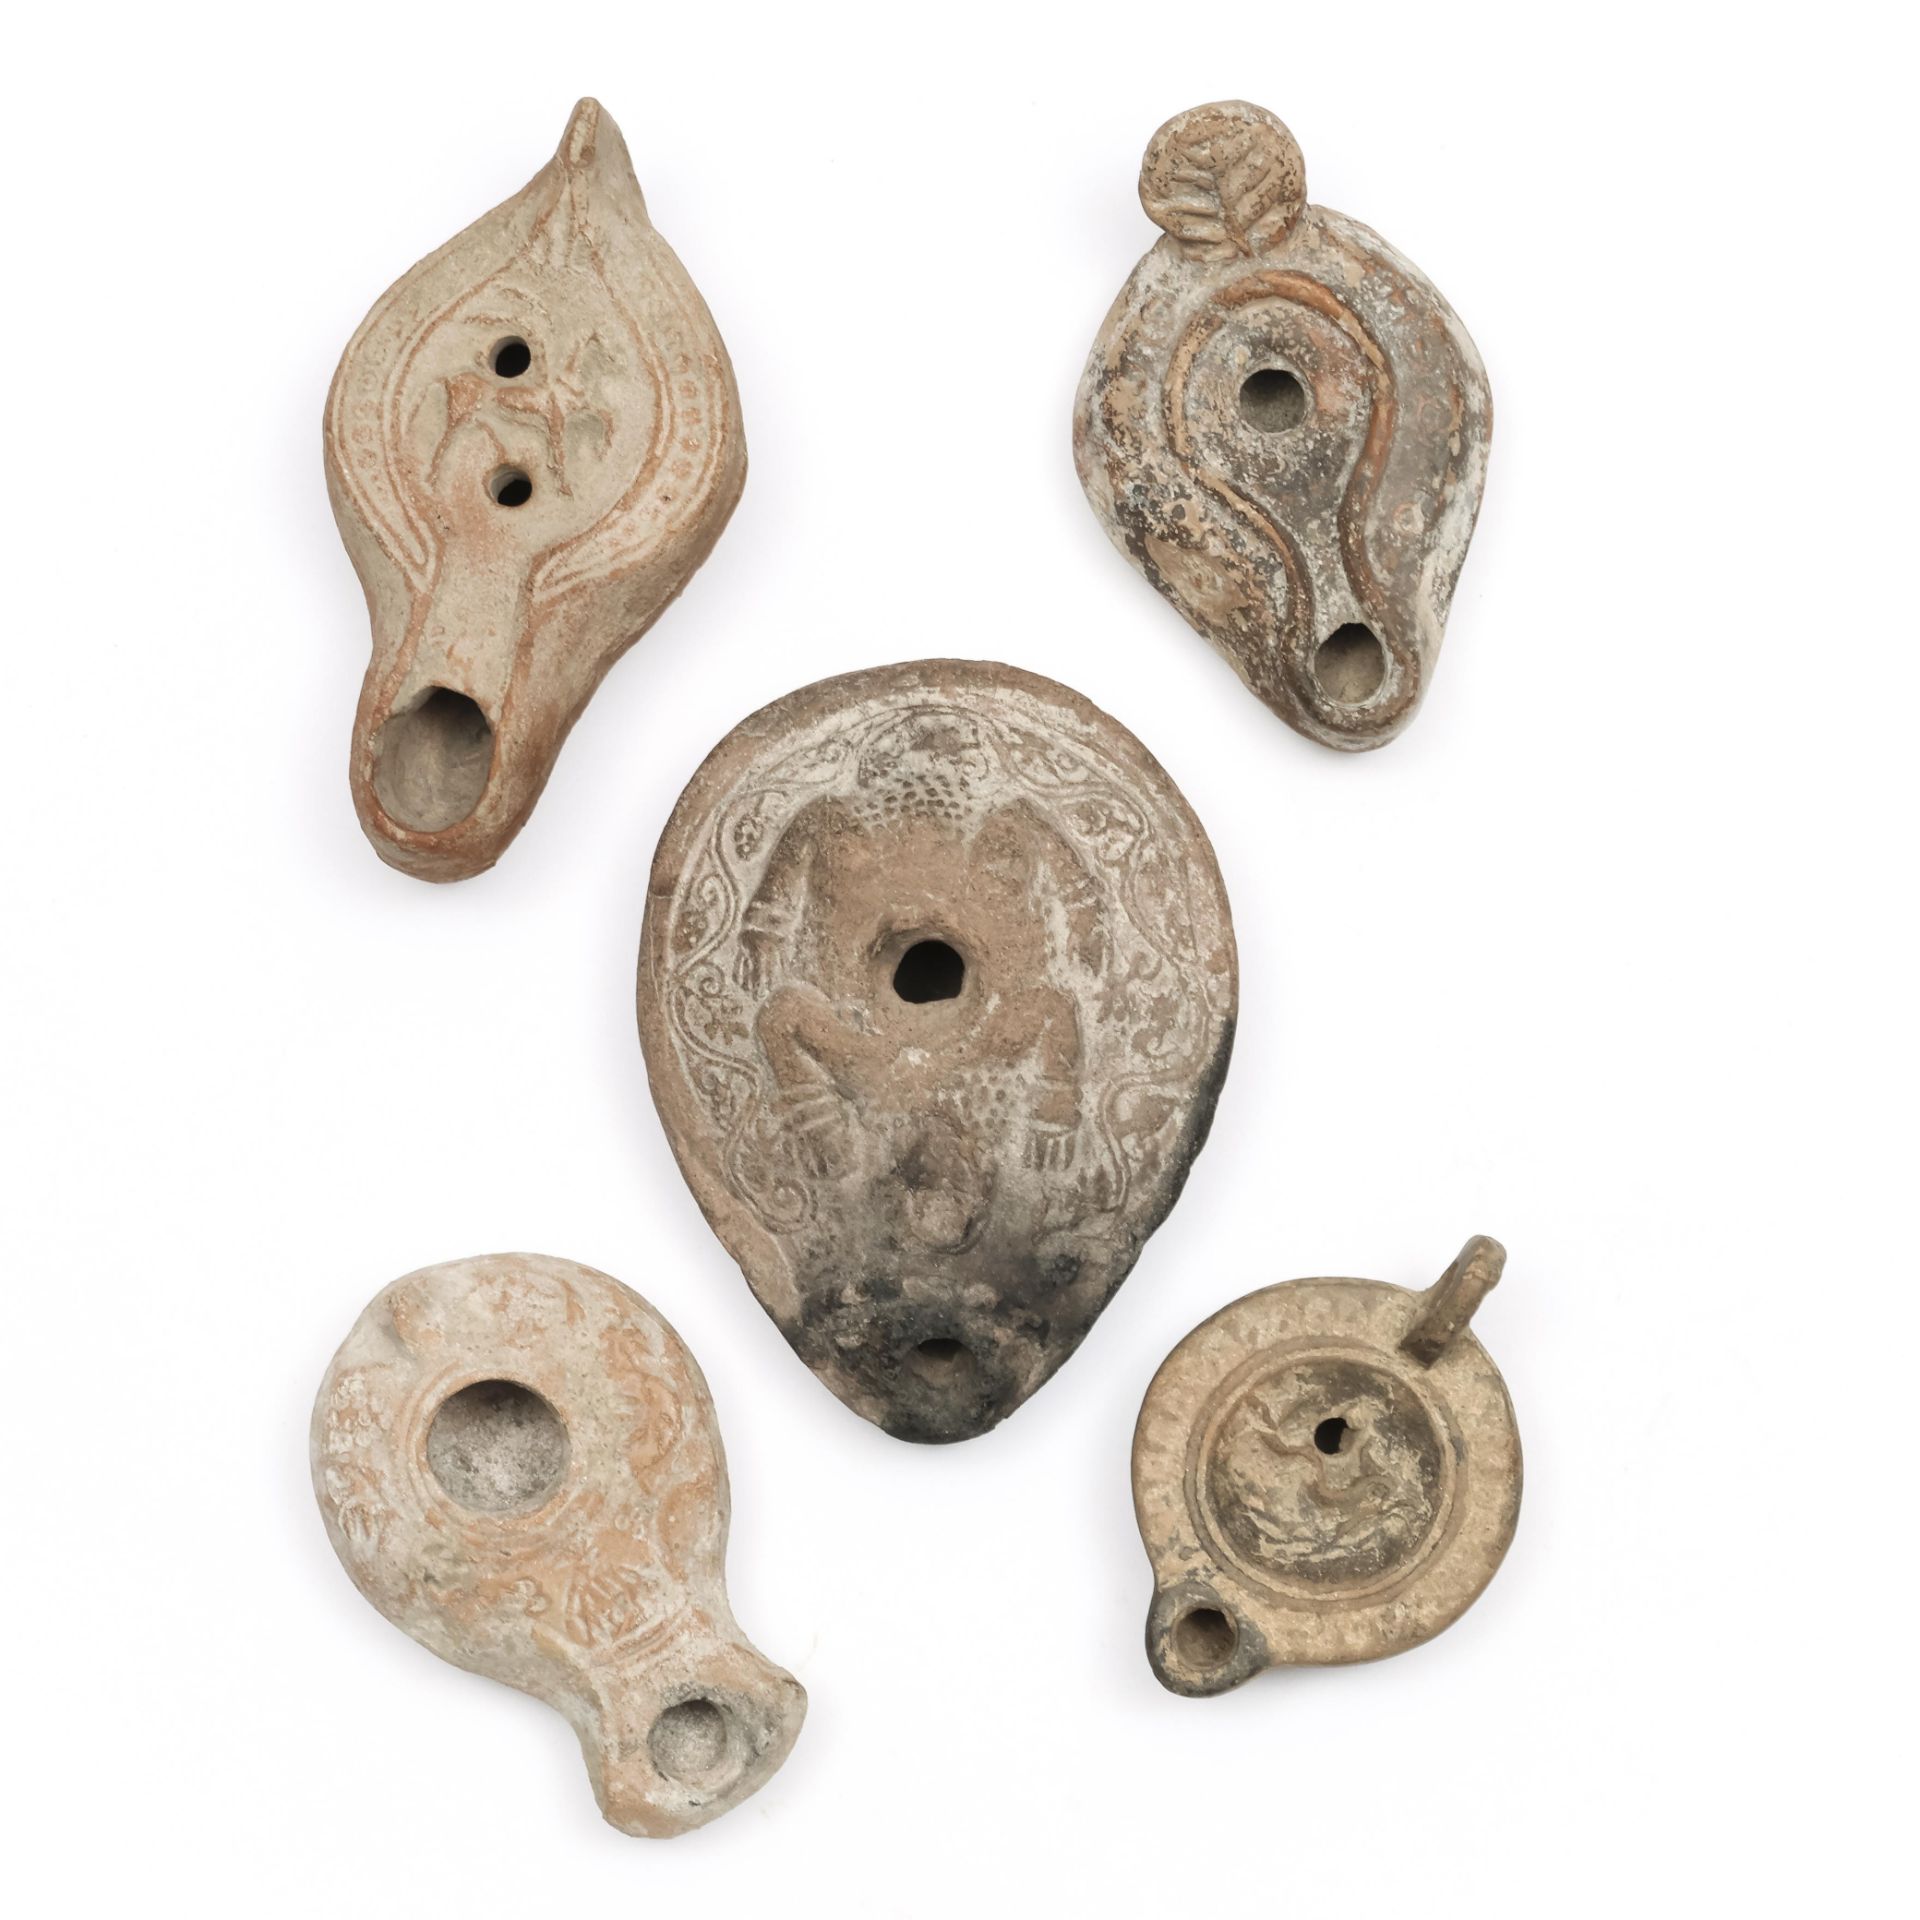 Five various terracotta oil lamps; Near Eastern and Roman.